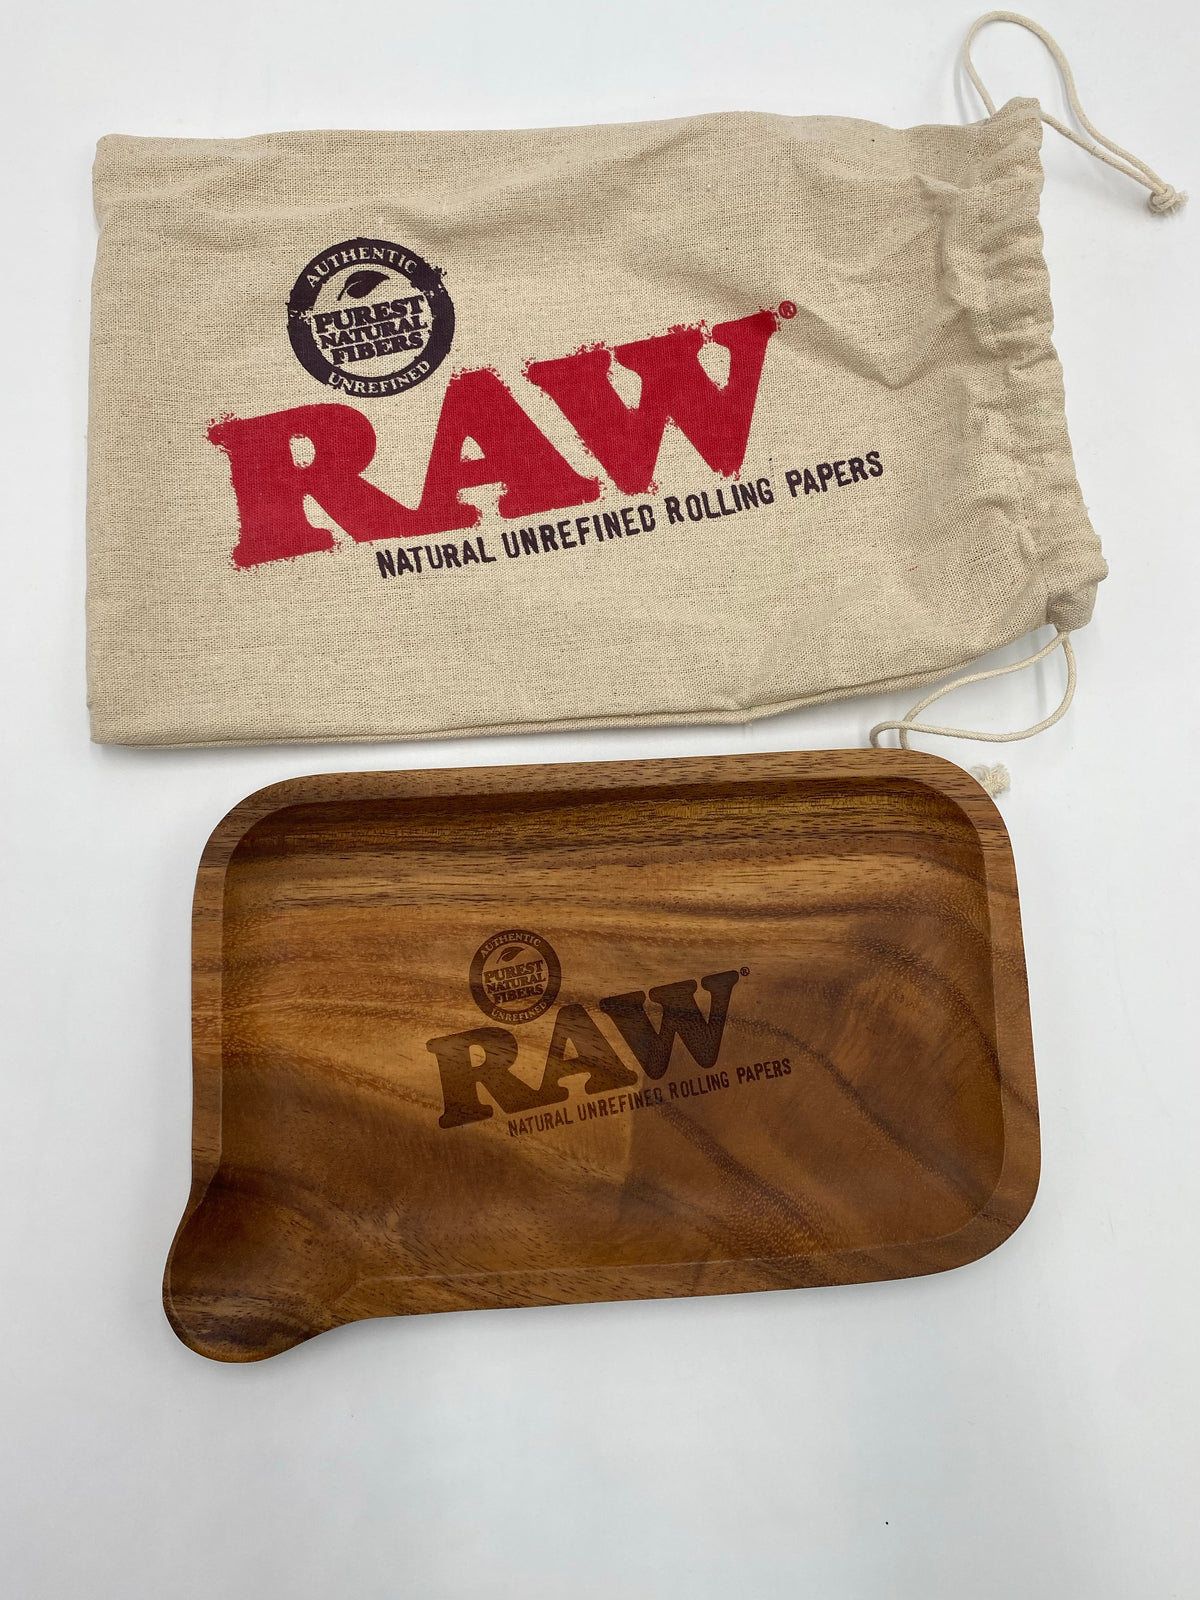 RAW ROLLING TRAY WOOD WITH POUR SPOUT